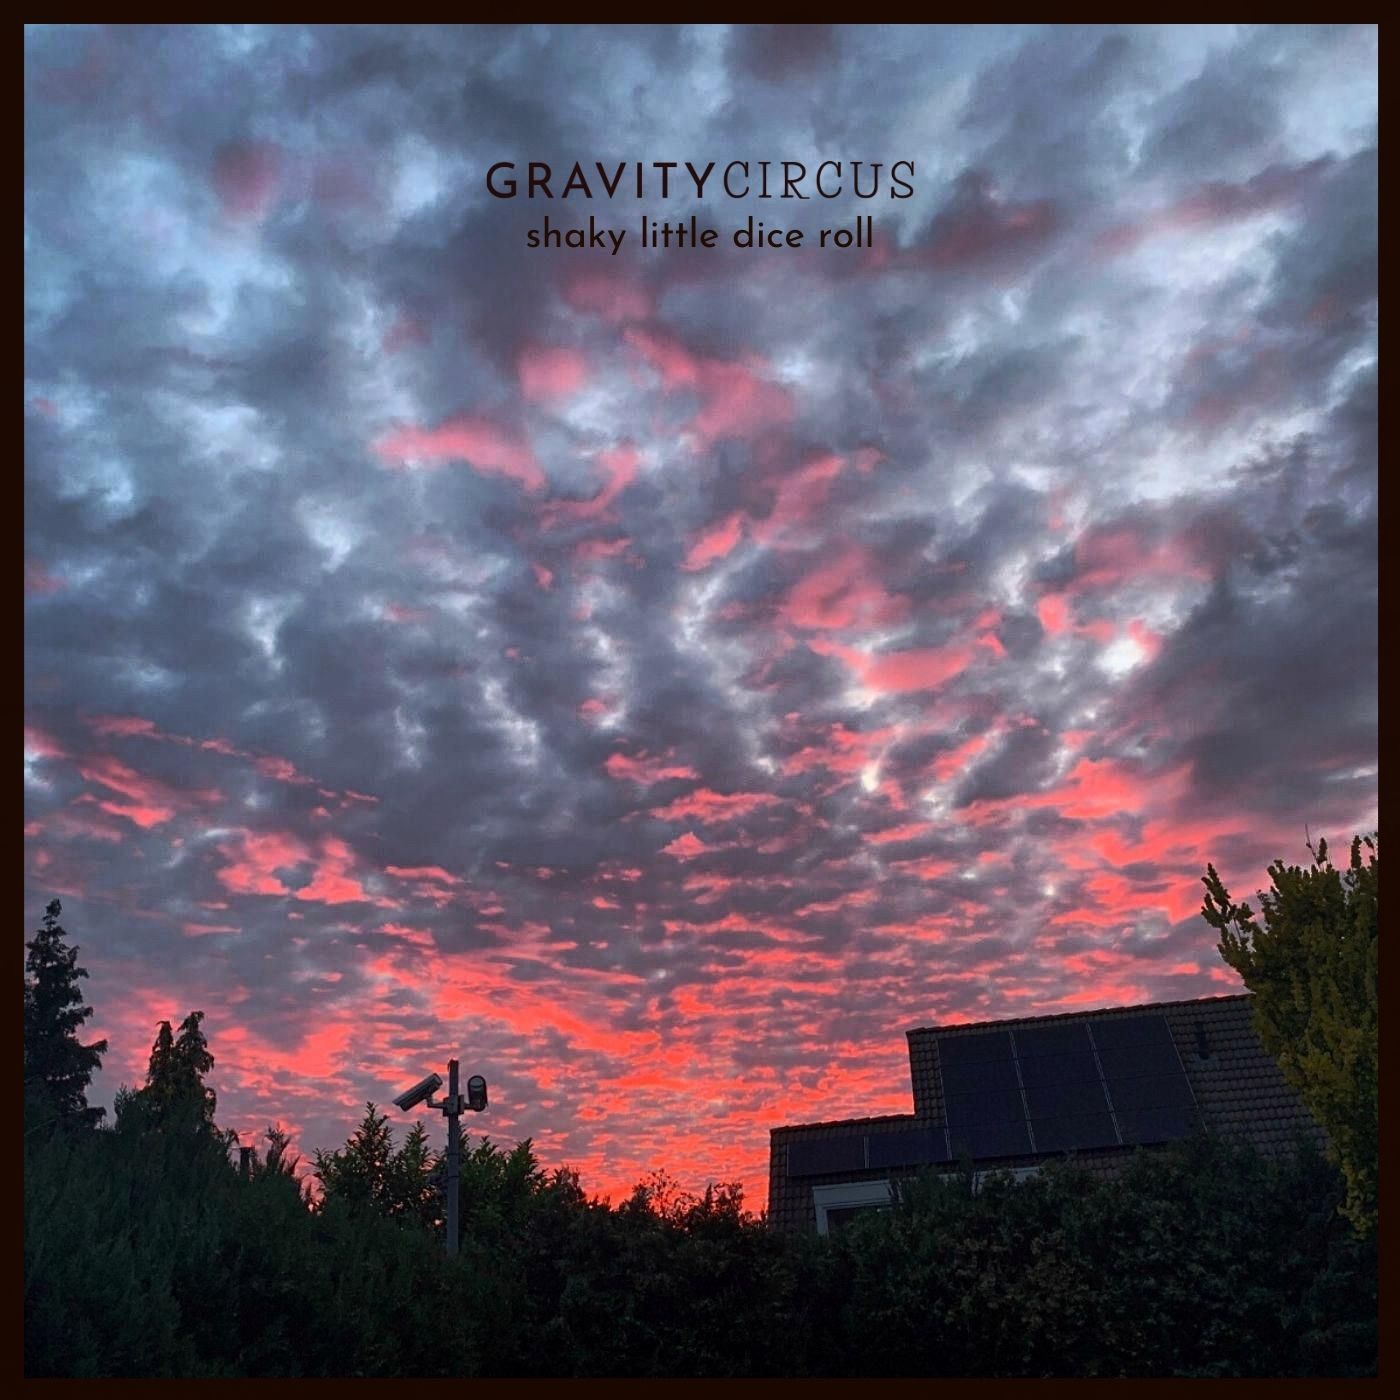 shaky little dice roll - gravity circus - netherlands - indie - indie music - indie rock - new music - music blog - wolf in a suit - wolfinasuit - wolf in a suit blog - wolf in a suit music blog